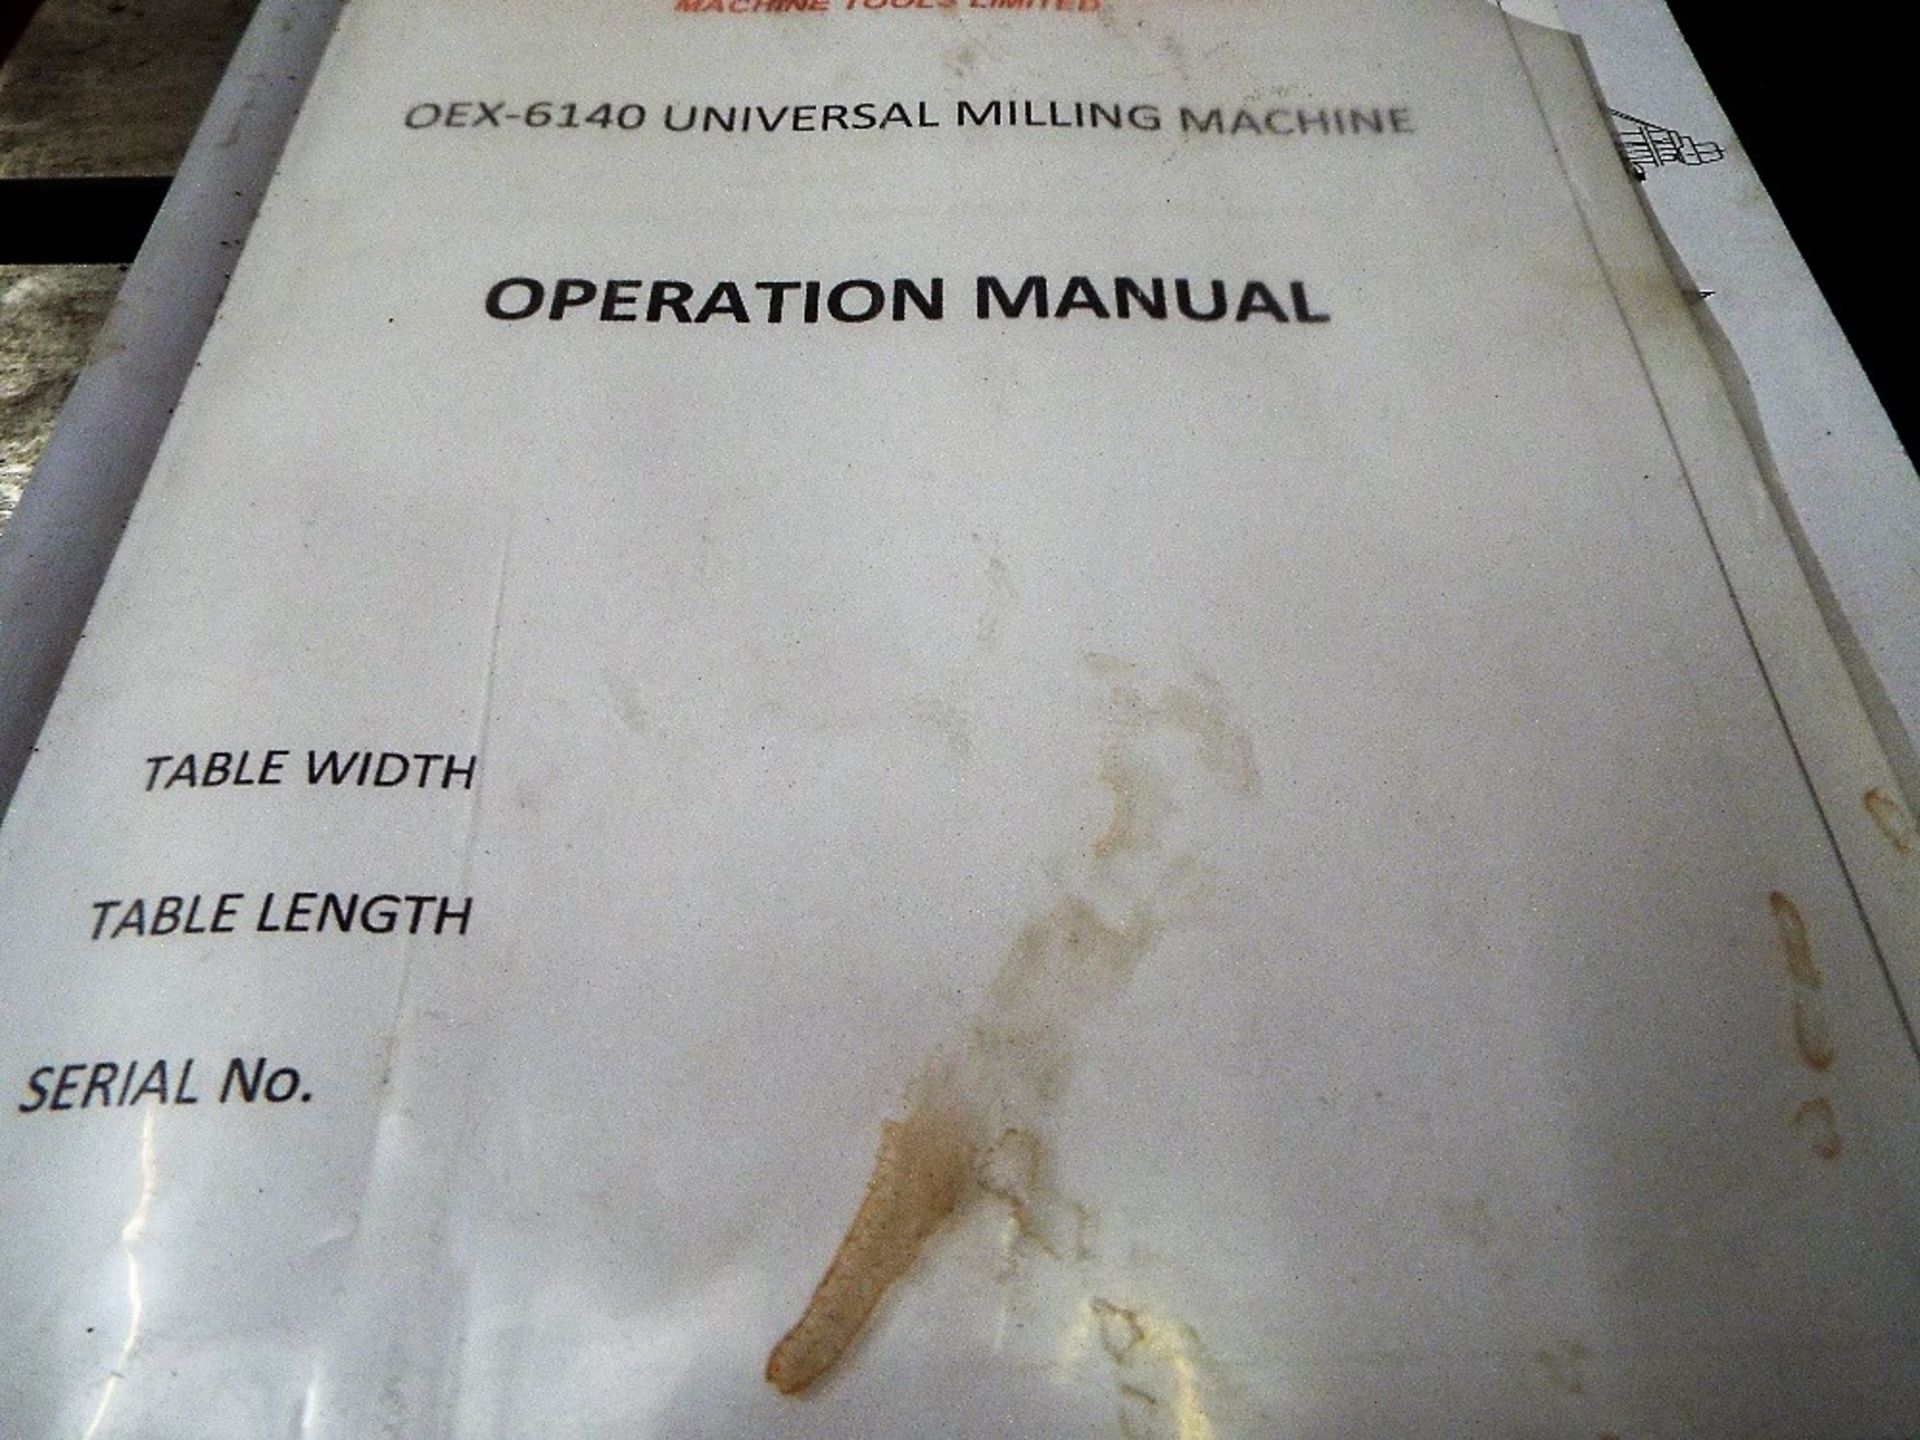 Universal Milling Machine Type - OEX 6140 Machine No - 05 63 Available due to a cancelled order - Image 13 of 15